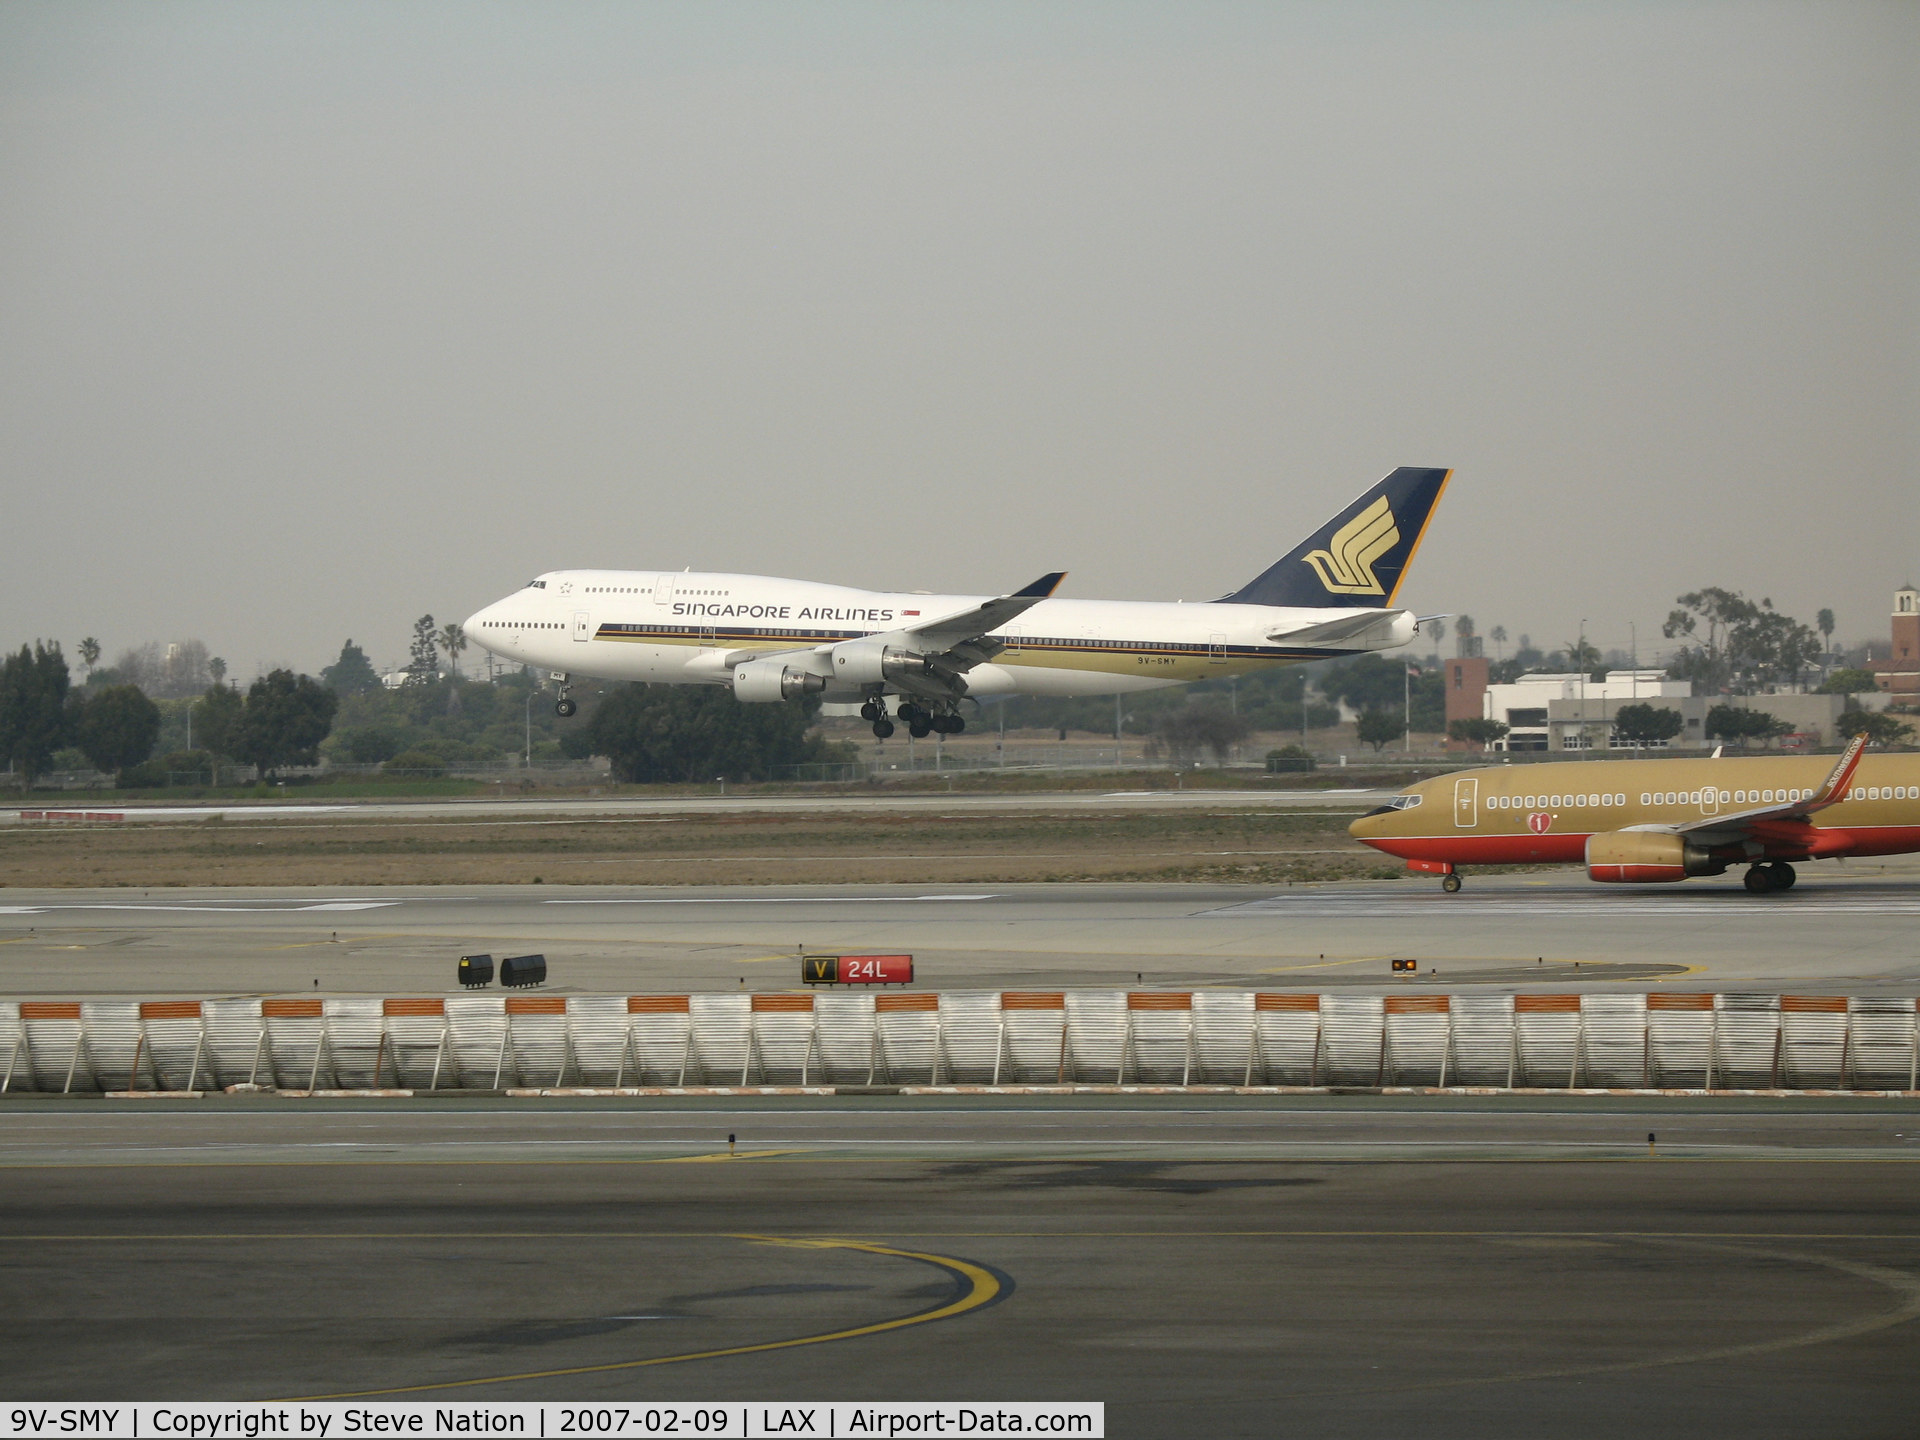 9V-SMY, 1994 Boeing 747-412 C/N 27217, Singapore Airlines 747-412 touching down @ LAX